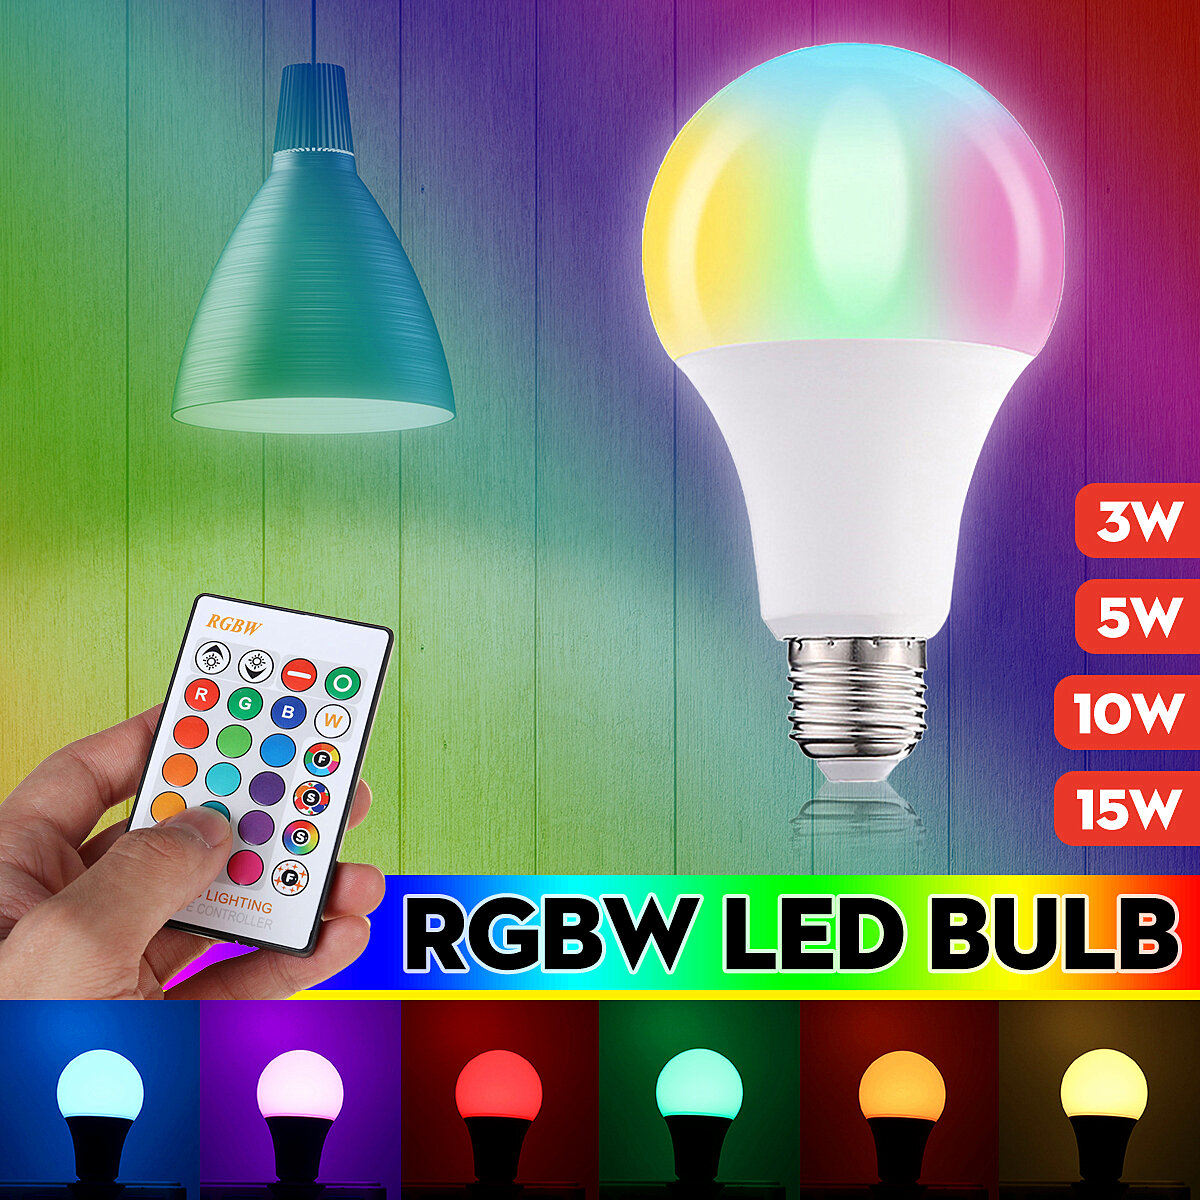 

3W 5W 10W 15W RGBW E27 LED Bulb 16 Color Dimmable Globe Light With Remote Control For Party Decoration AC85-265V